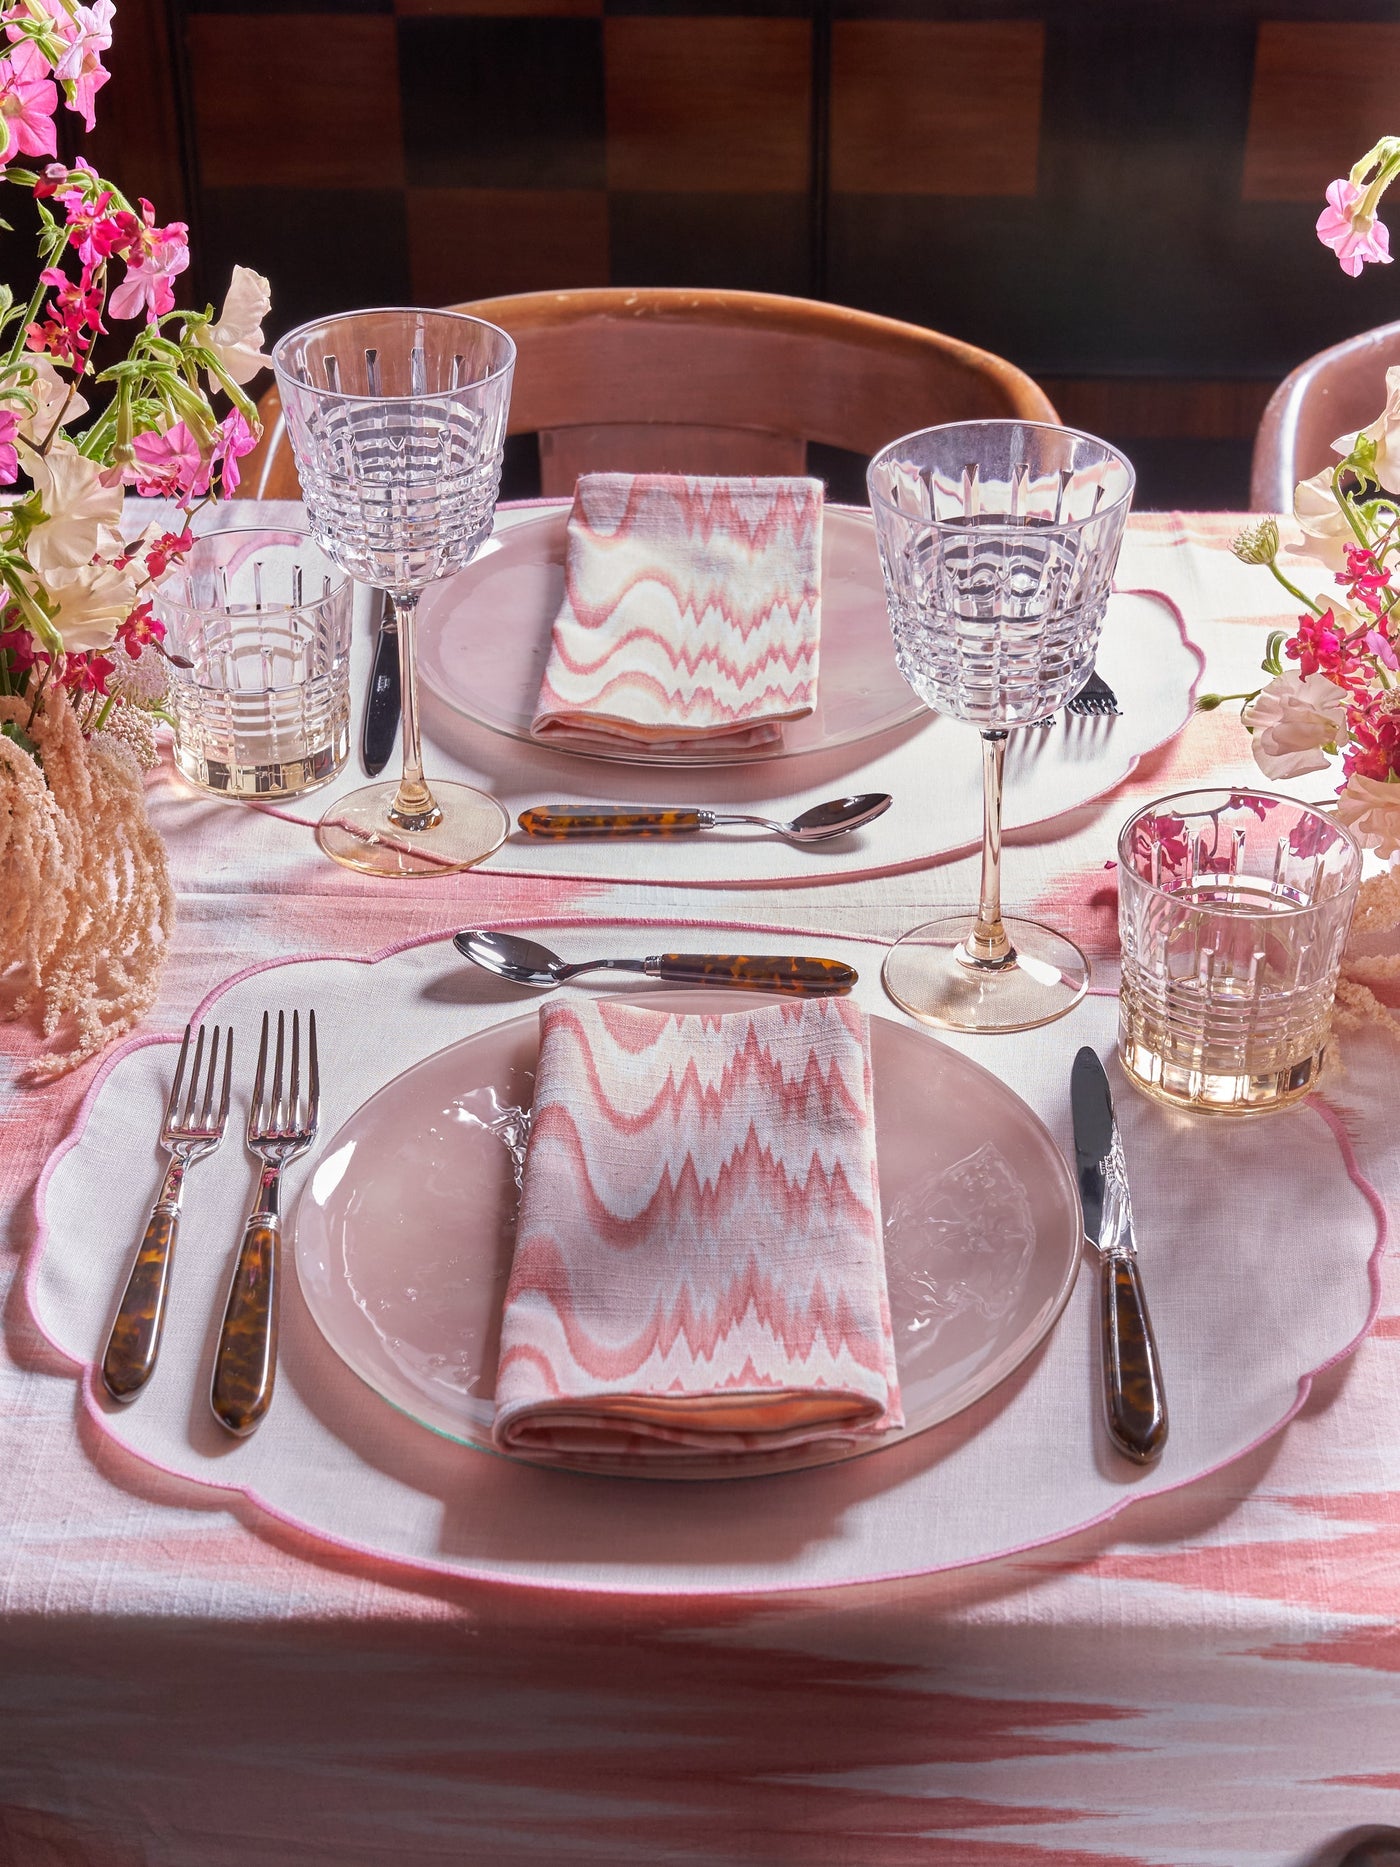 Pink Flamestitch Tablescape Permanent Resident Aurora Tablecloth Napkins in Pink Sabre Tortoise Flatware Creart Crystal Glassware Cipriani Hong Kong 